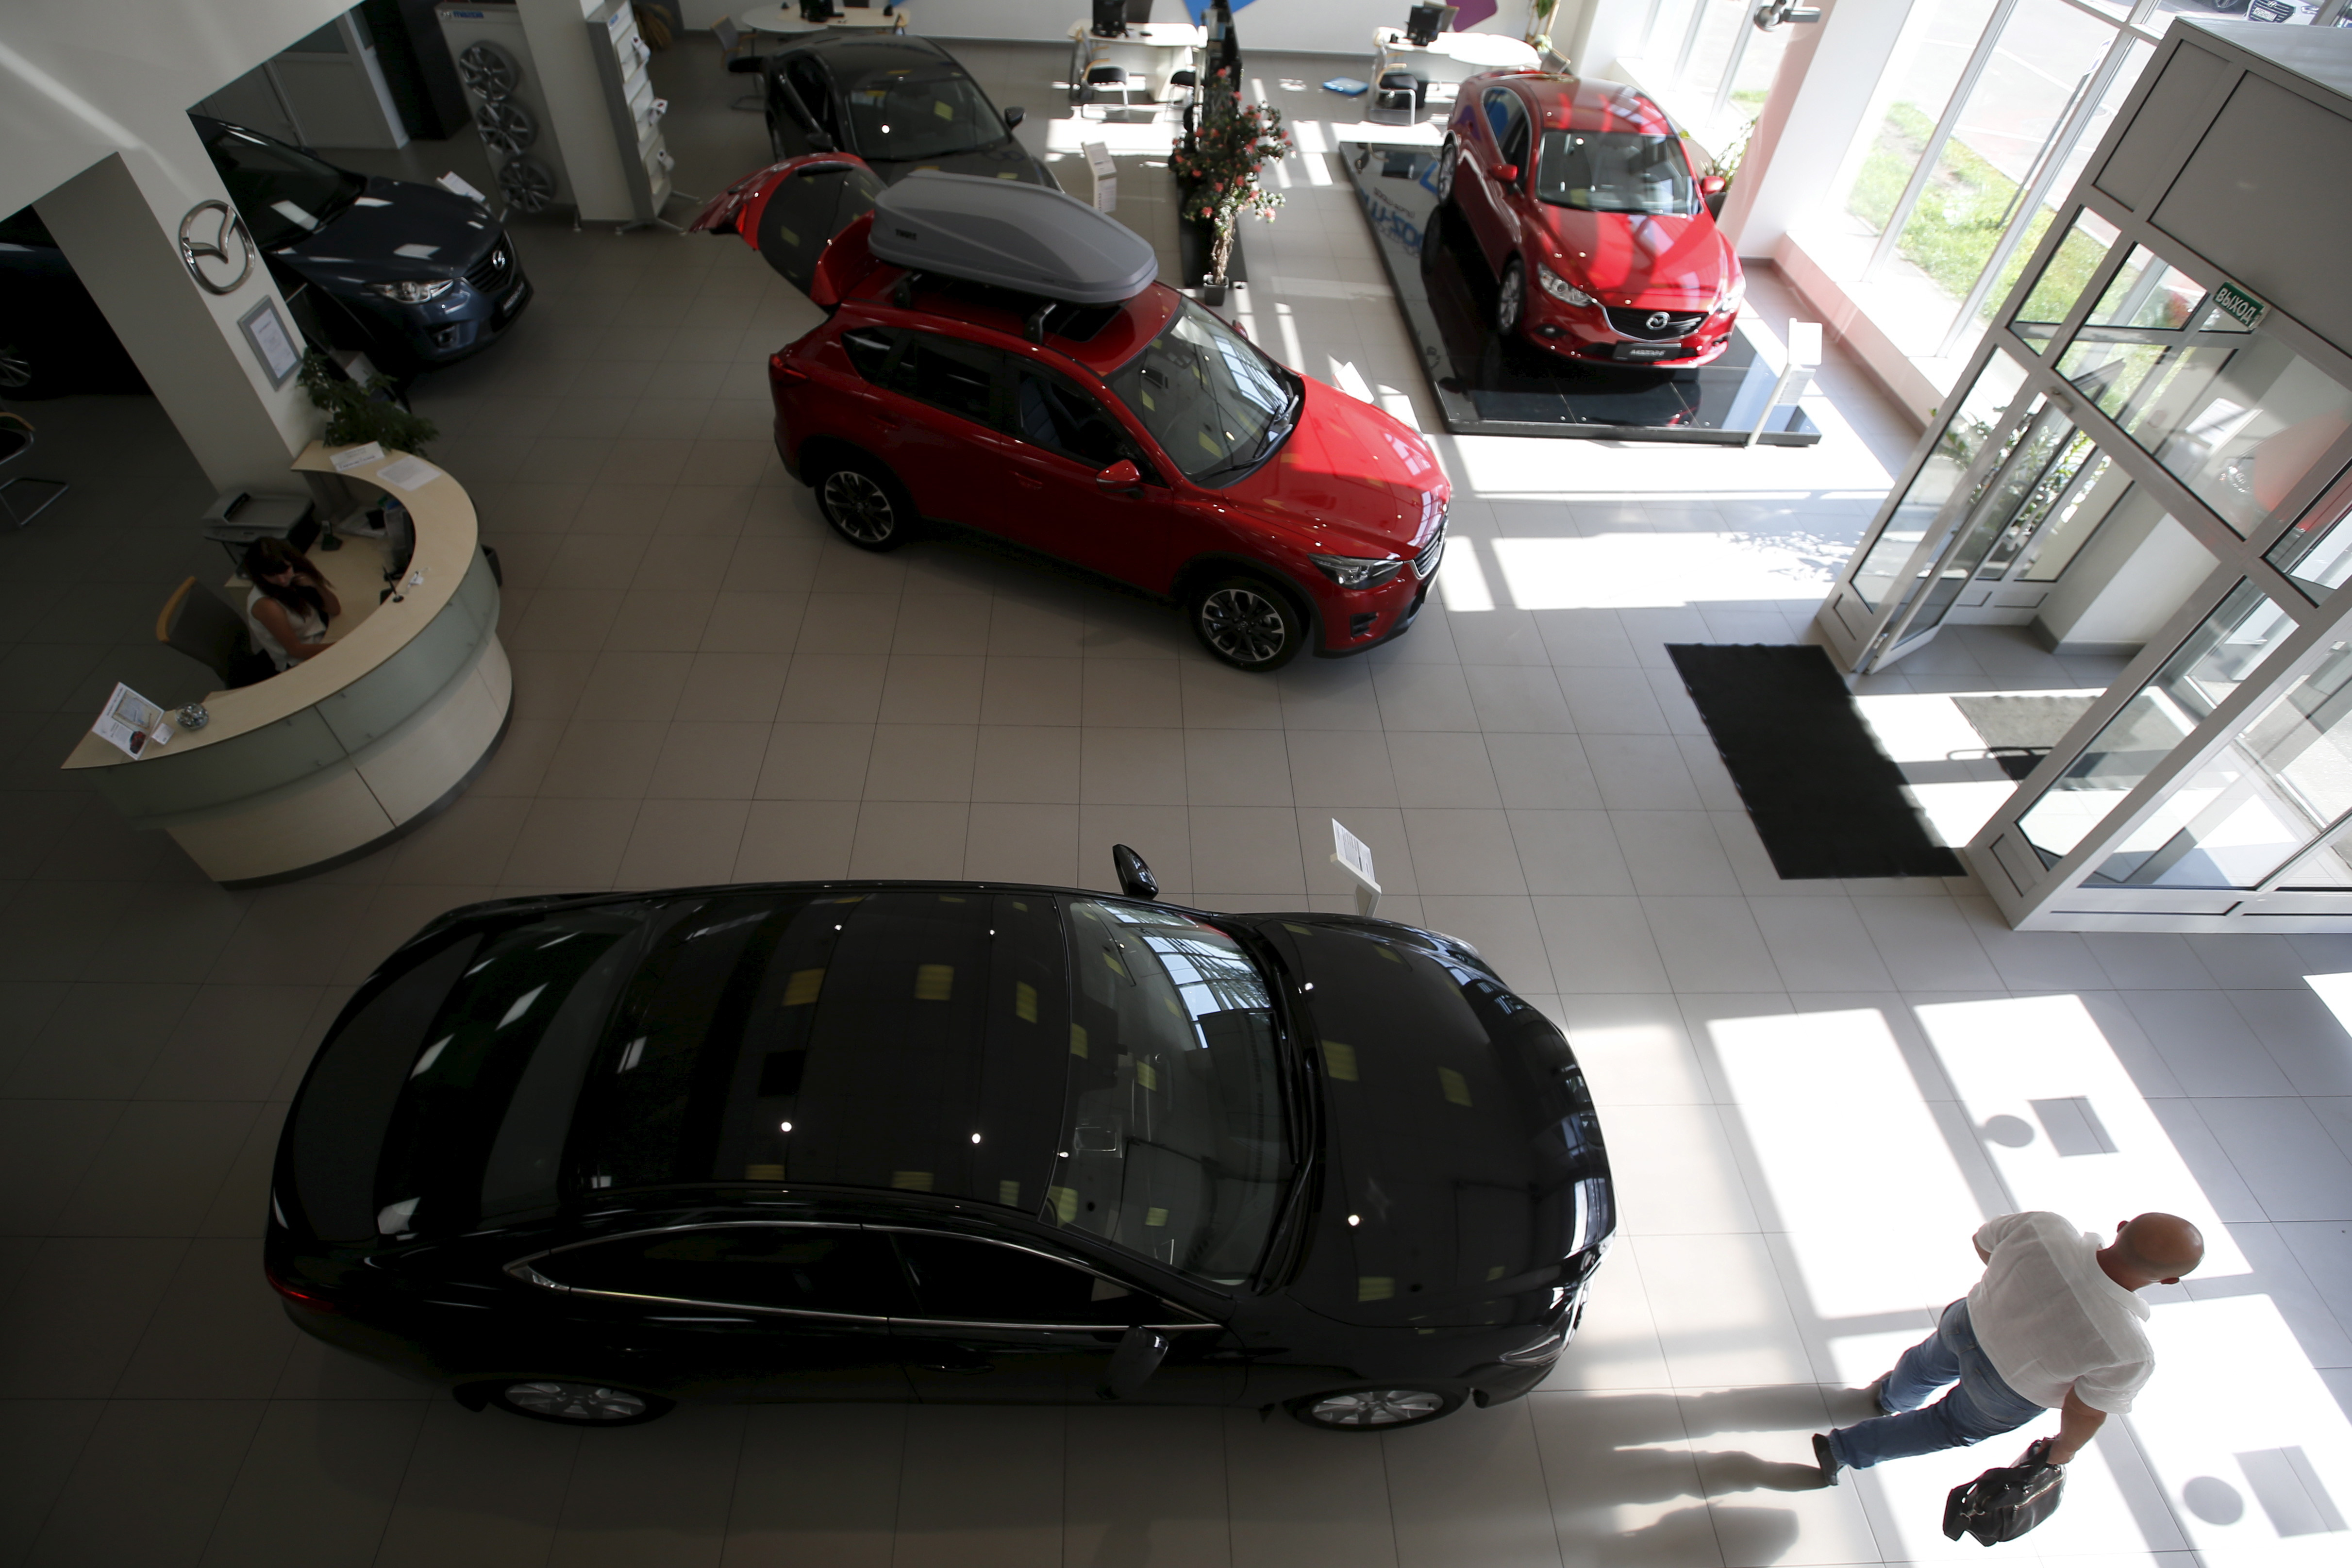 Mazda 6 and CX 5 models are on sale at showroom of Avtomir company in Moscow